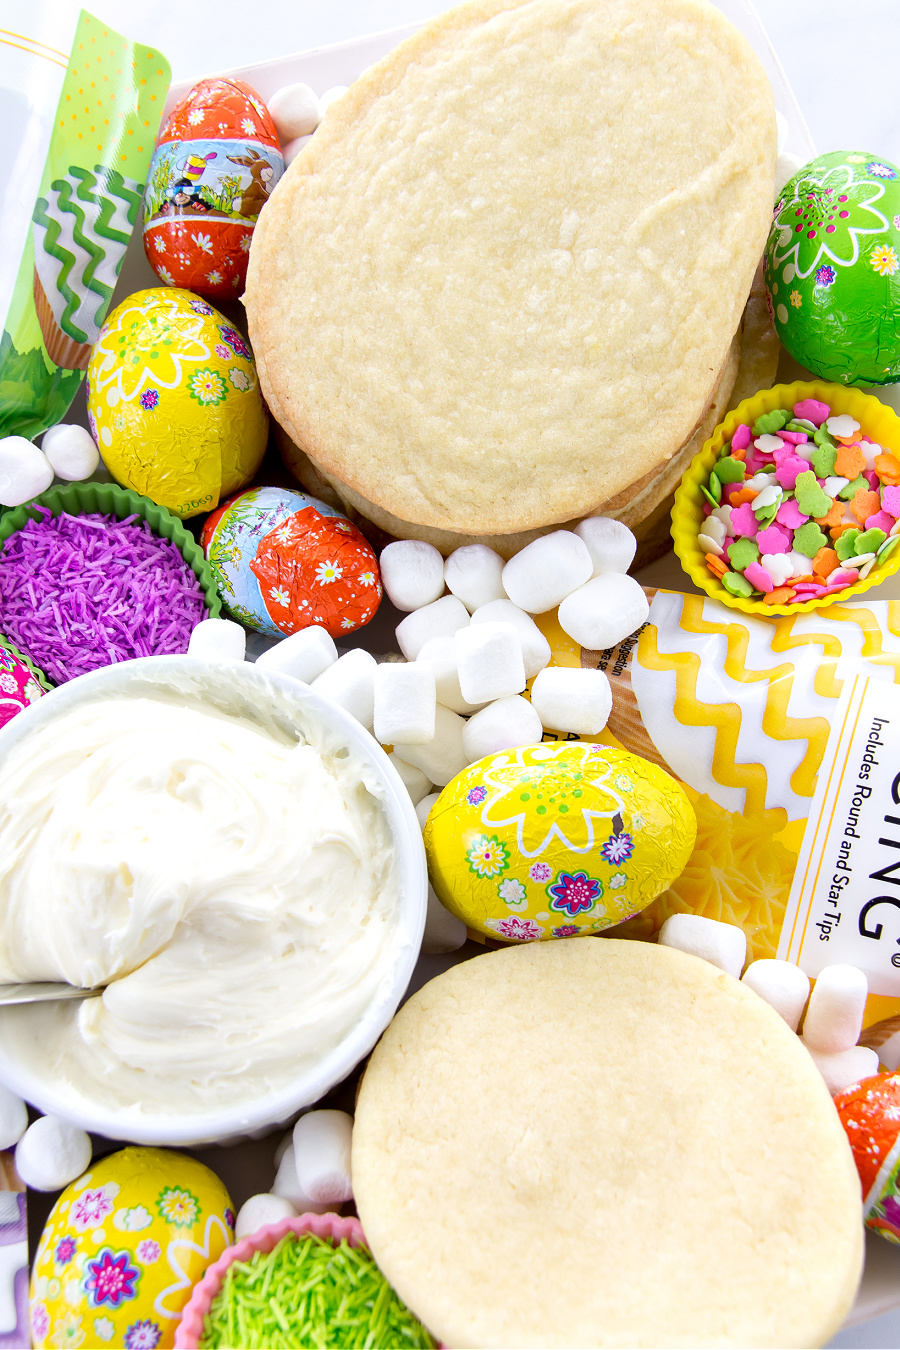 Egg-shaped sugar cookies, toppings, and icing on a food tray for kids to decorate cookies at an Easter party.